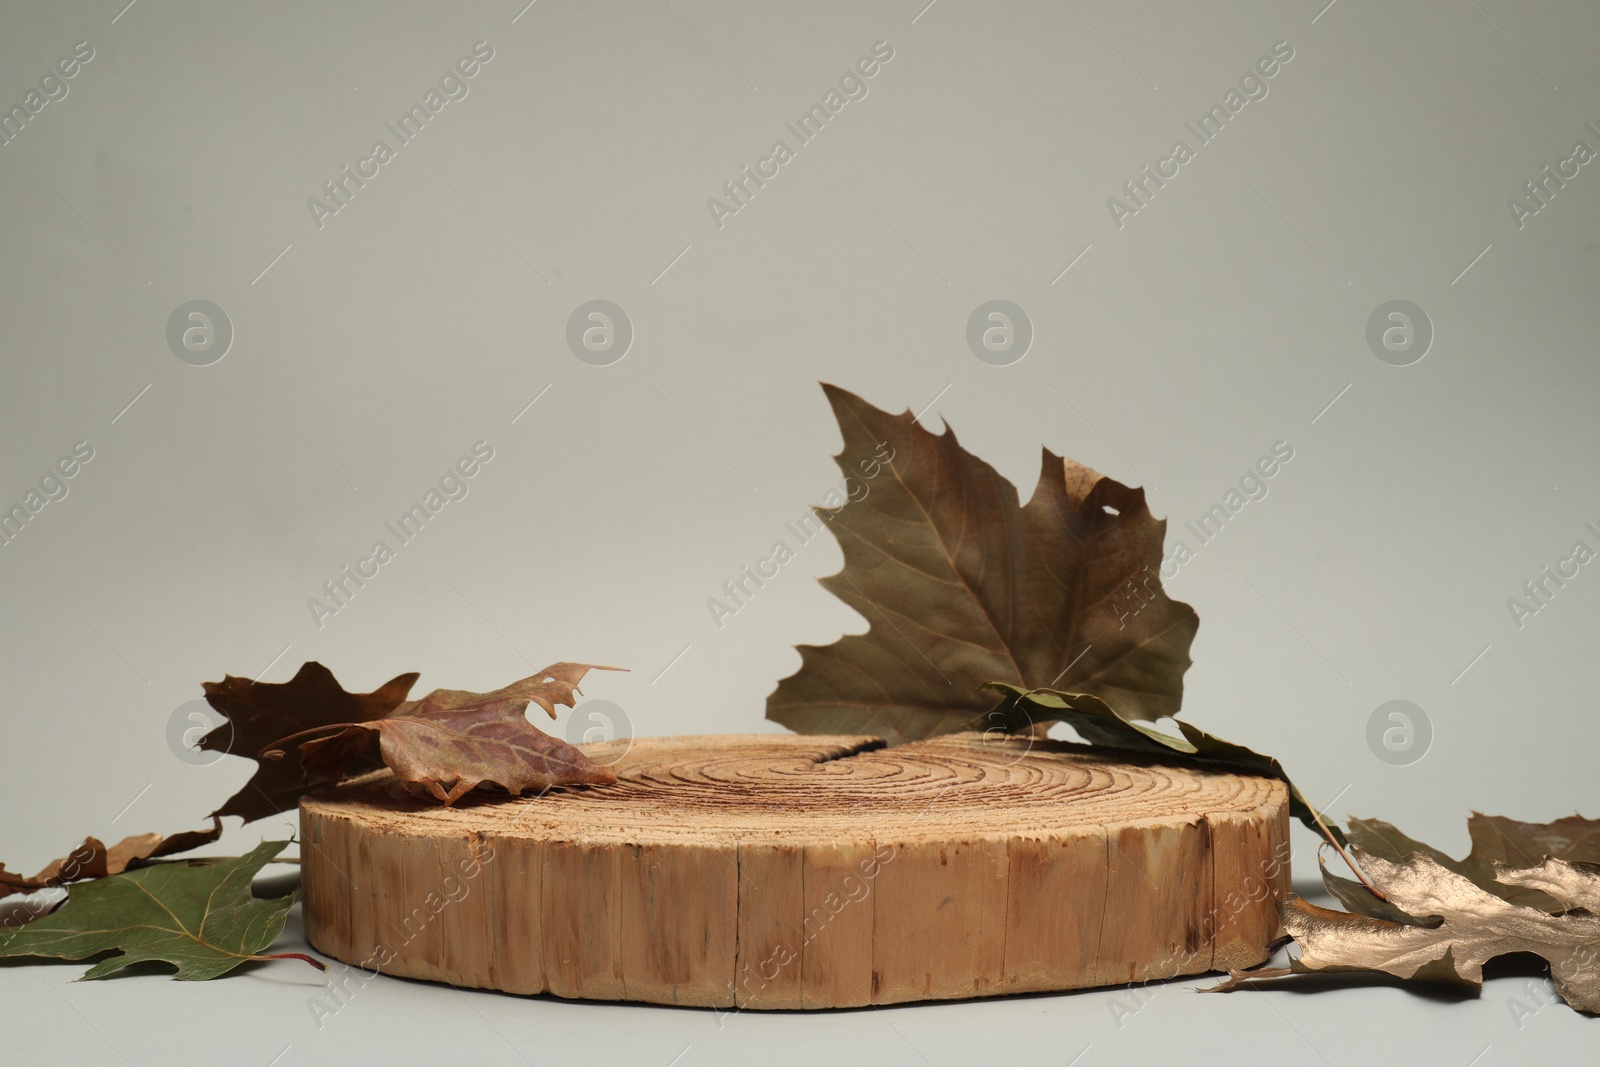 Photo of Autumn presentation for product. Wooden stump and dry leaves on light grey background